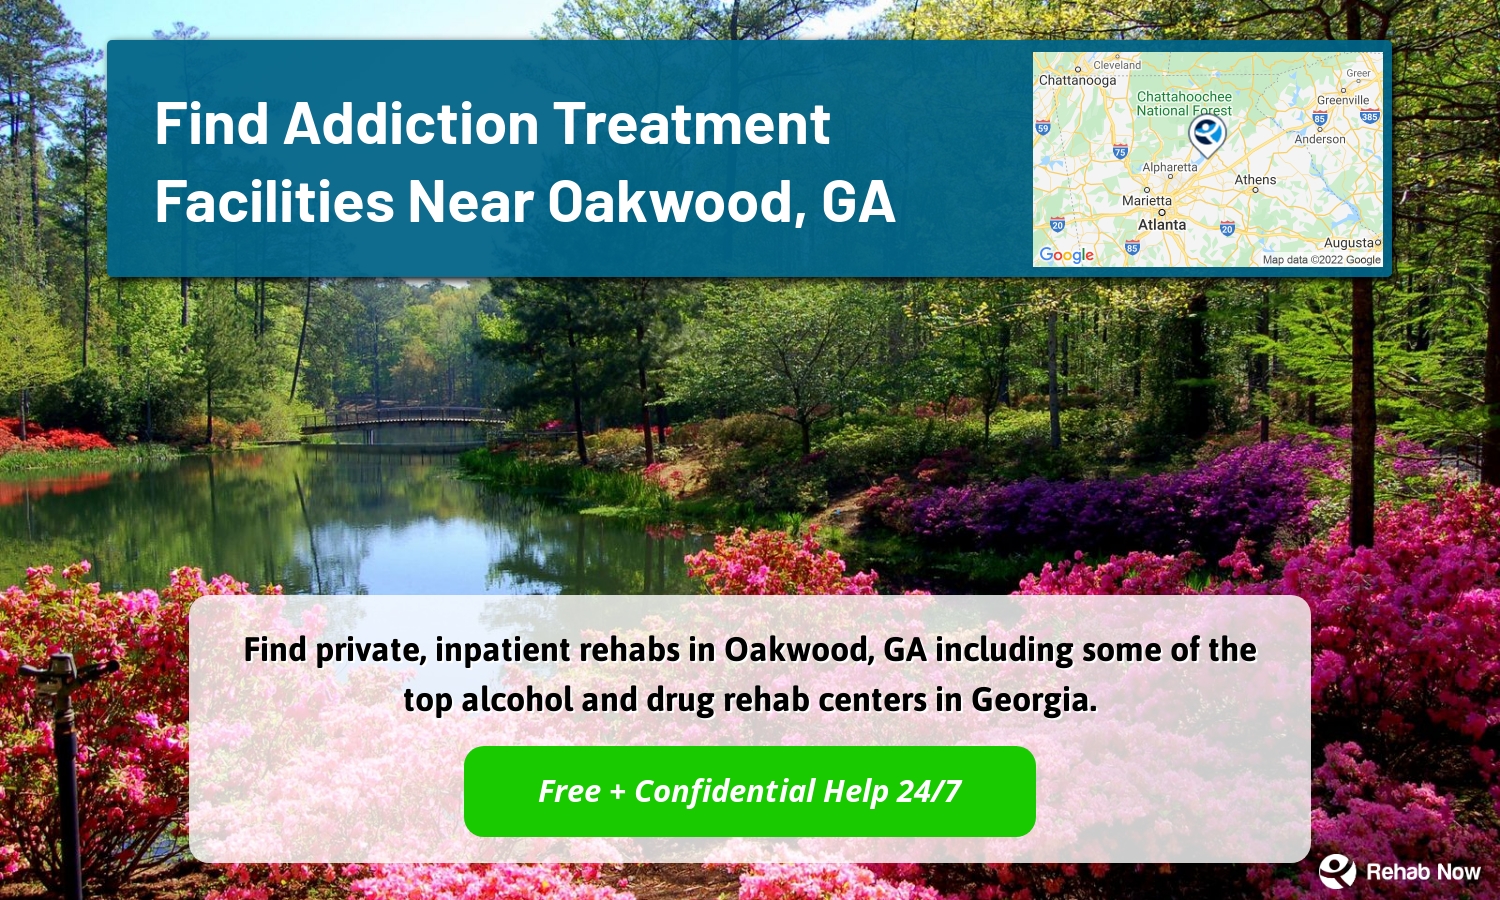 Find private, inpatient rehabs in Oakwood, GA including some of the top alcohol and drug rehab centers in Georgia.